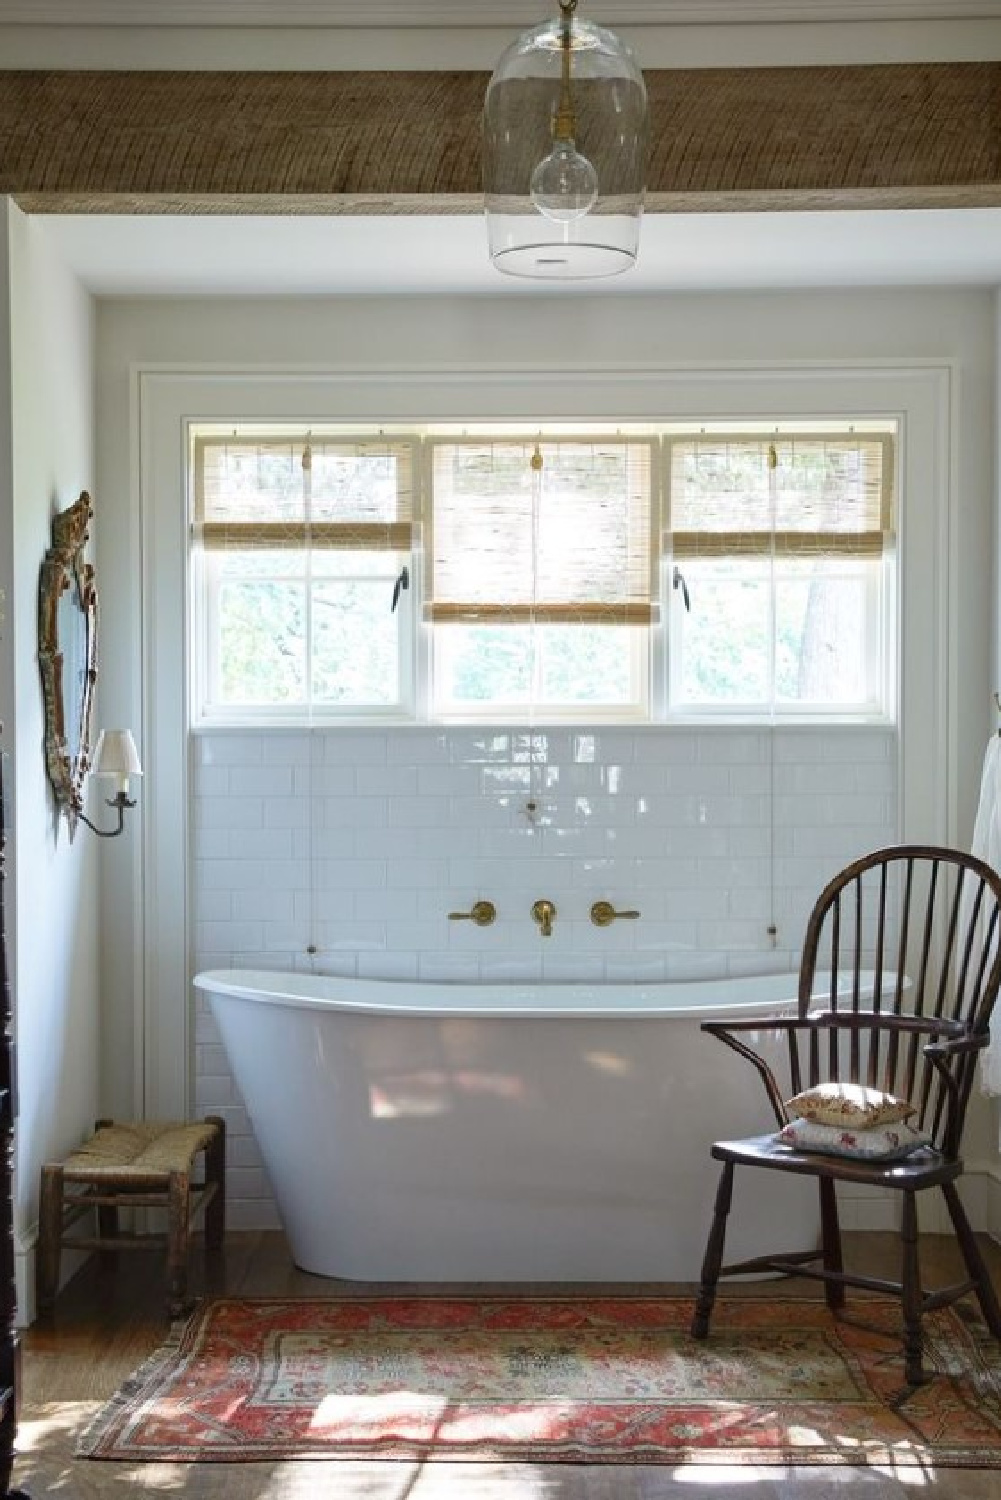 Old World bath with soaking tub. Timeless interior design by Shannon Bowers with nods to European antiques, patina, understated elegance, and sophisticated simplicity. #shannonbowers #timelessinteriors